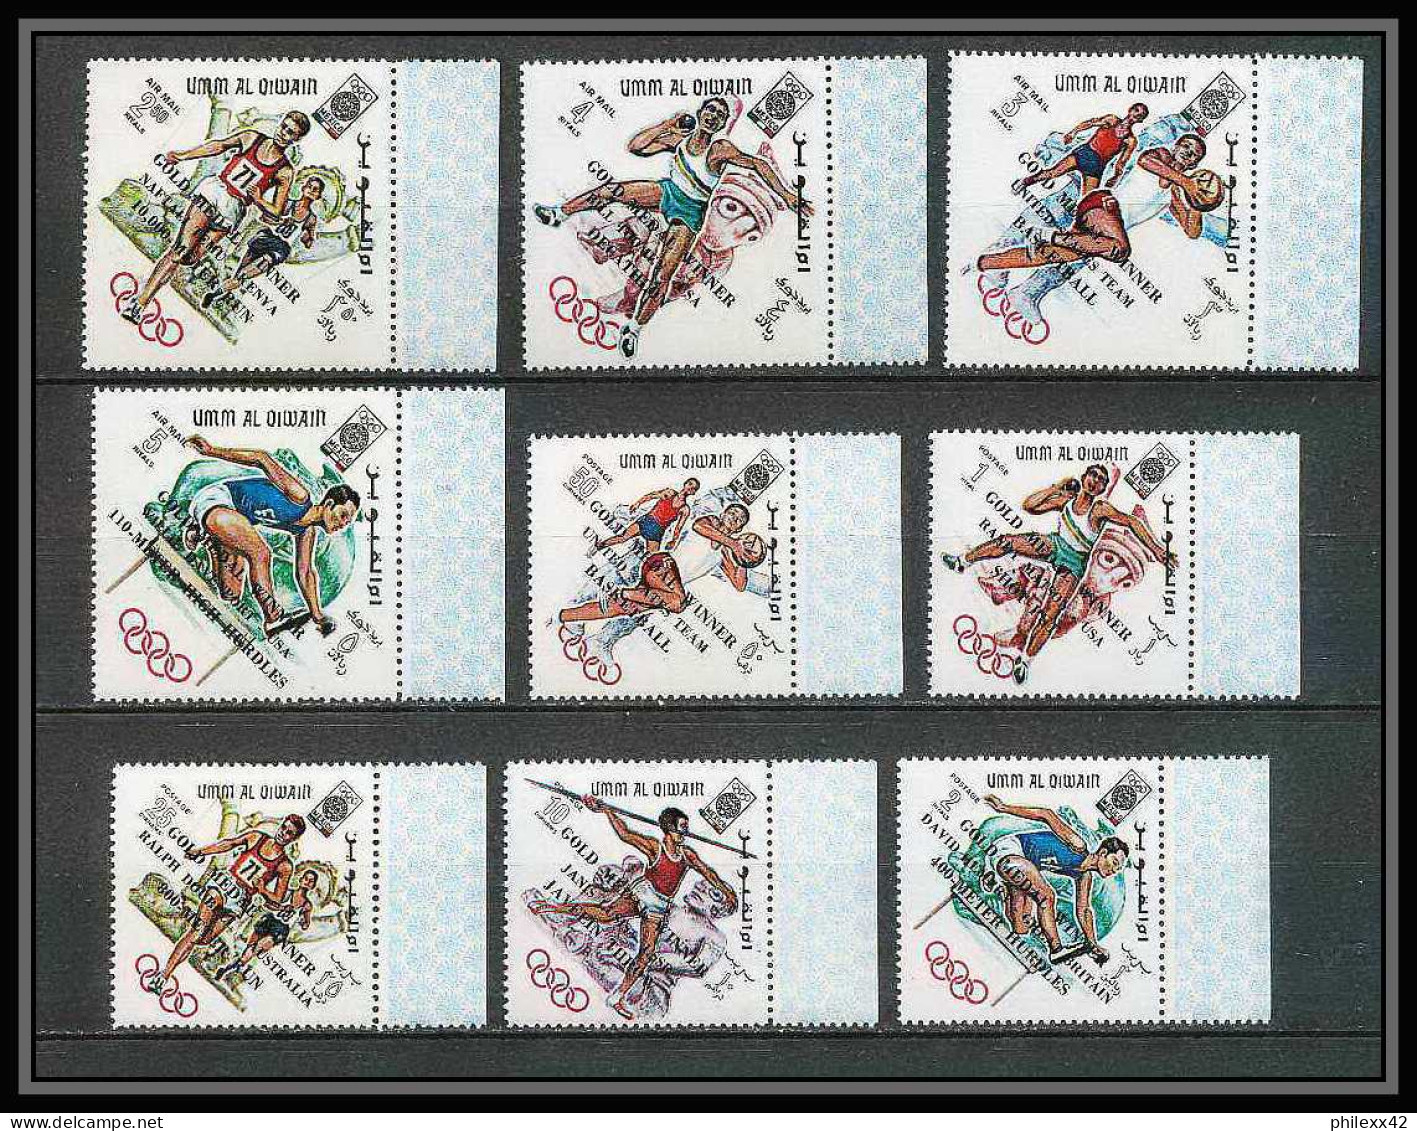 219 - Umm Al Qiwain MNH ** Mi N° 285 / 293 A Overprint Black Jeux Olympiques Olympic Games MEXICO 68 Basket Javelin - Sommer 1968: Mexico